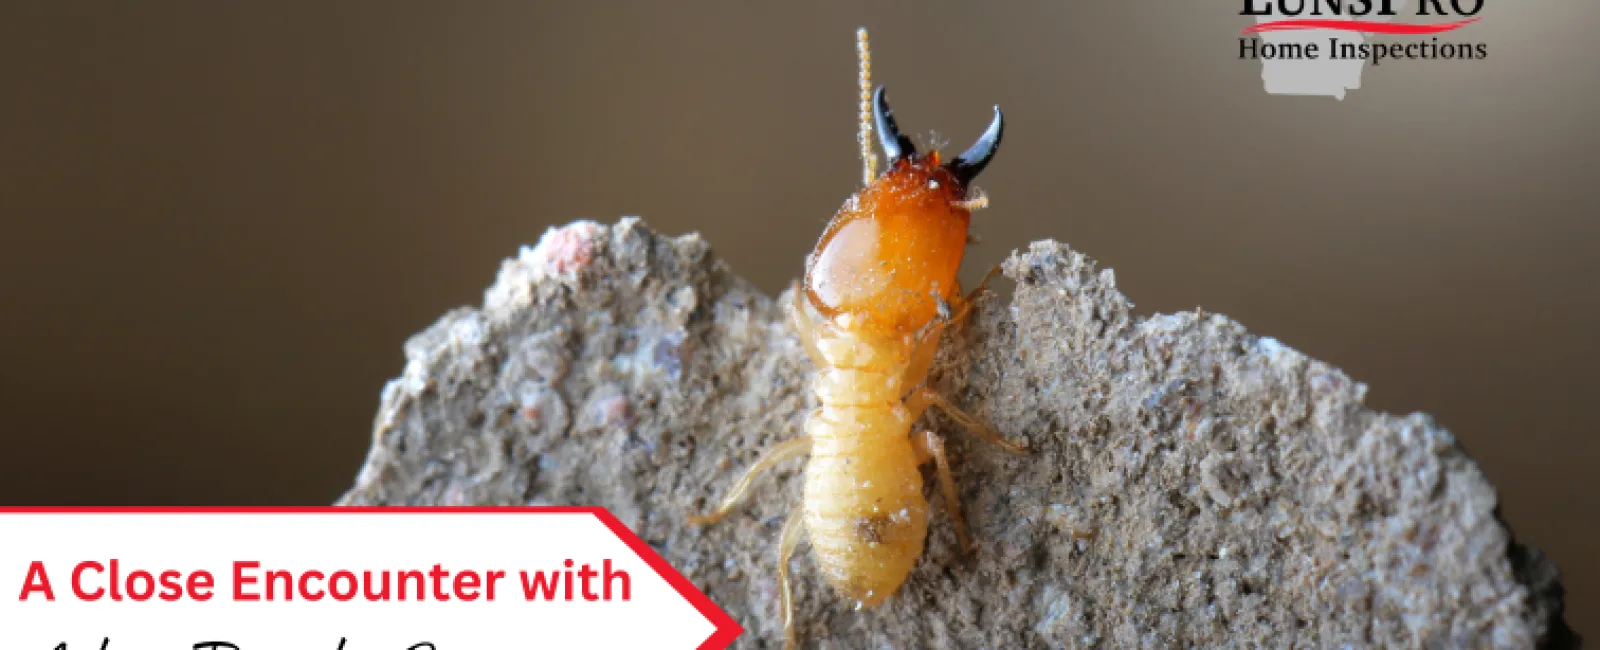 A Close Encounter with Active Termite Swarmers